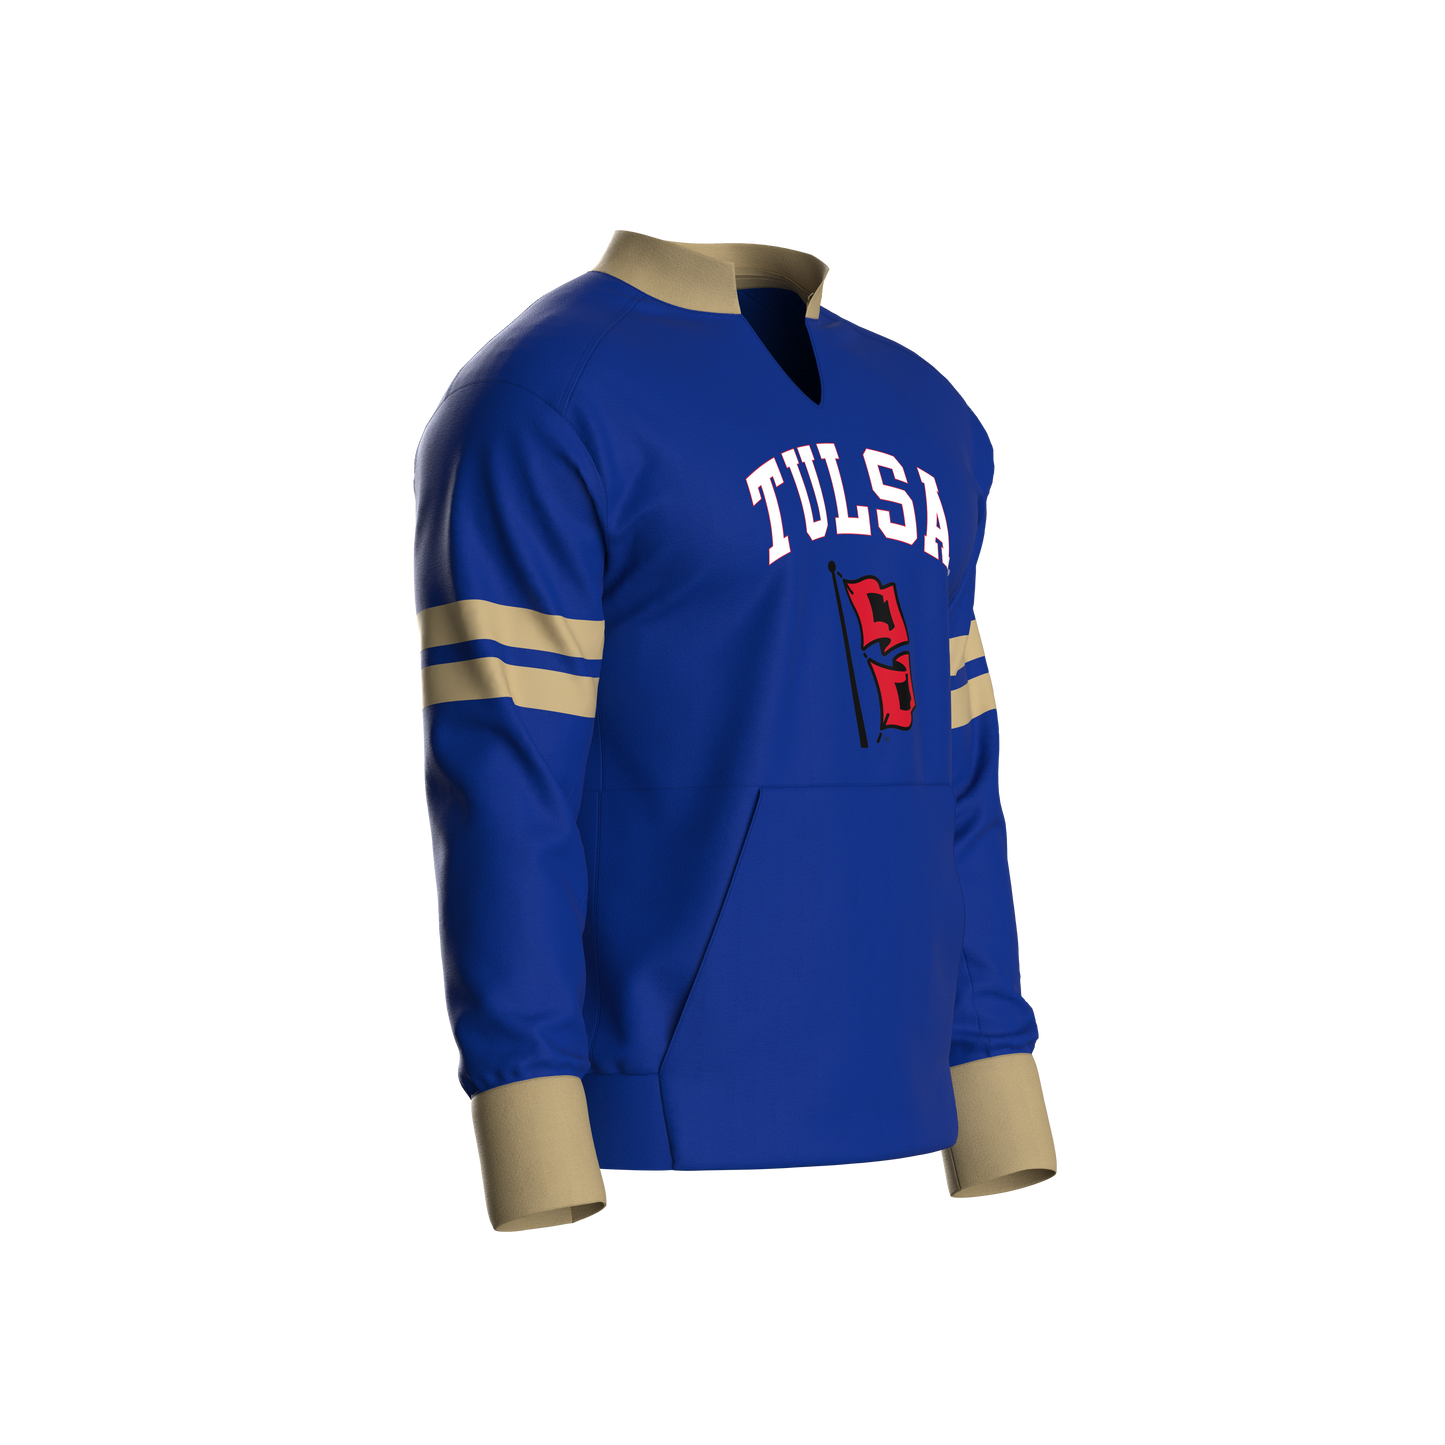 University of Tulsa Home Pullover (adult)